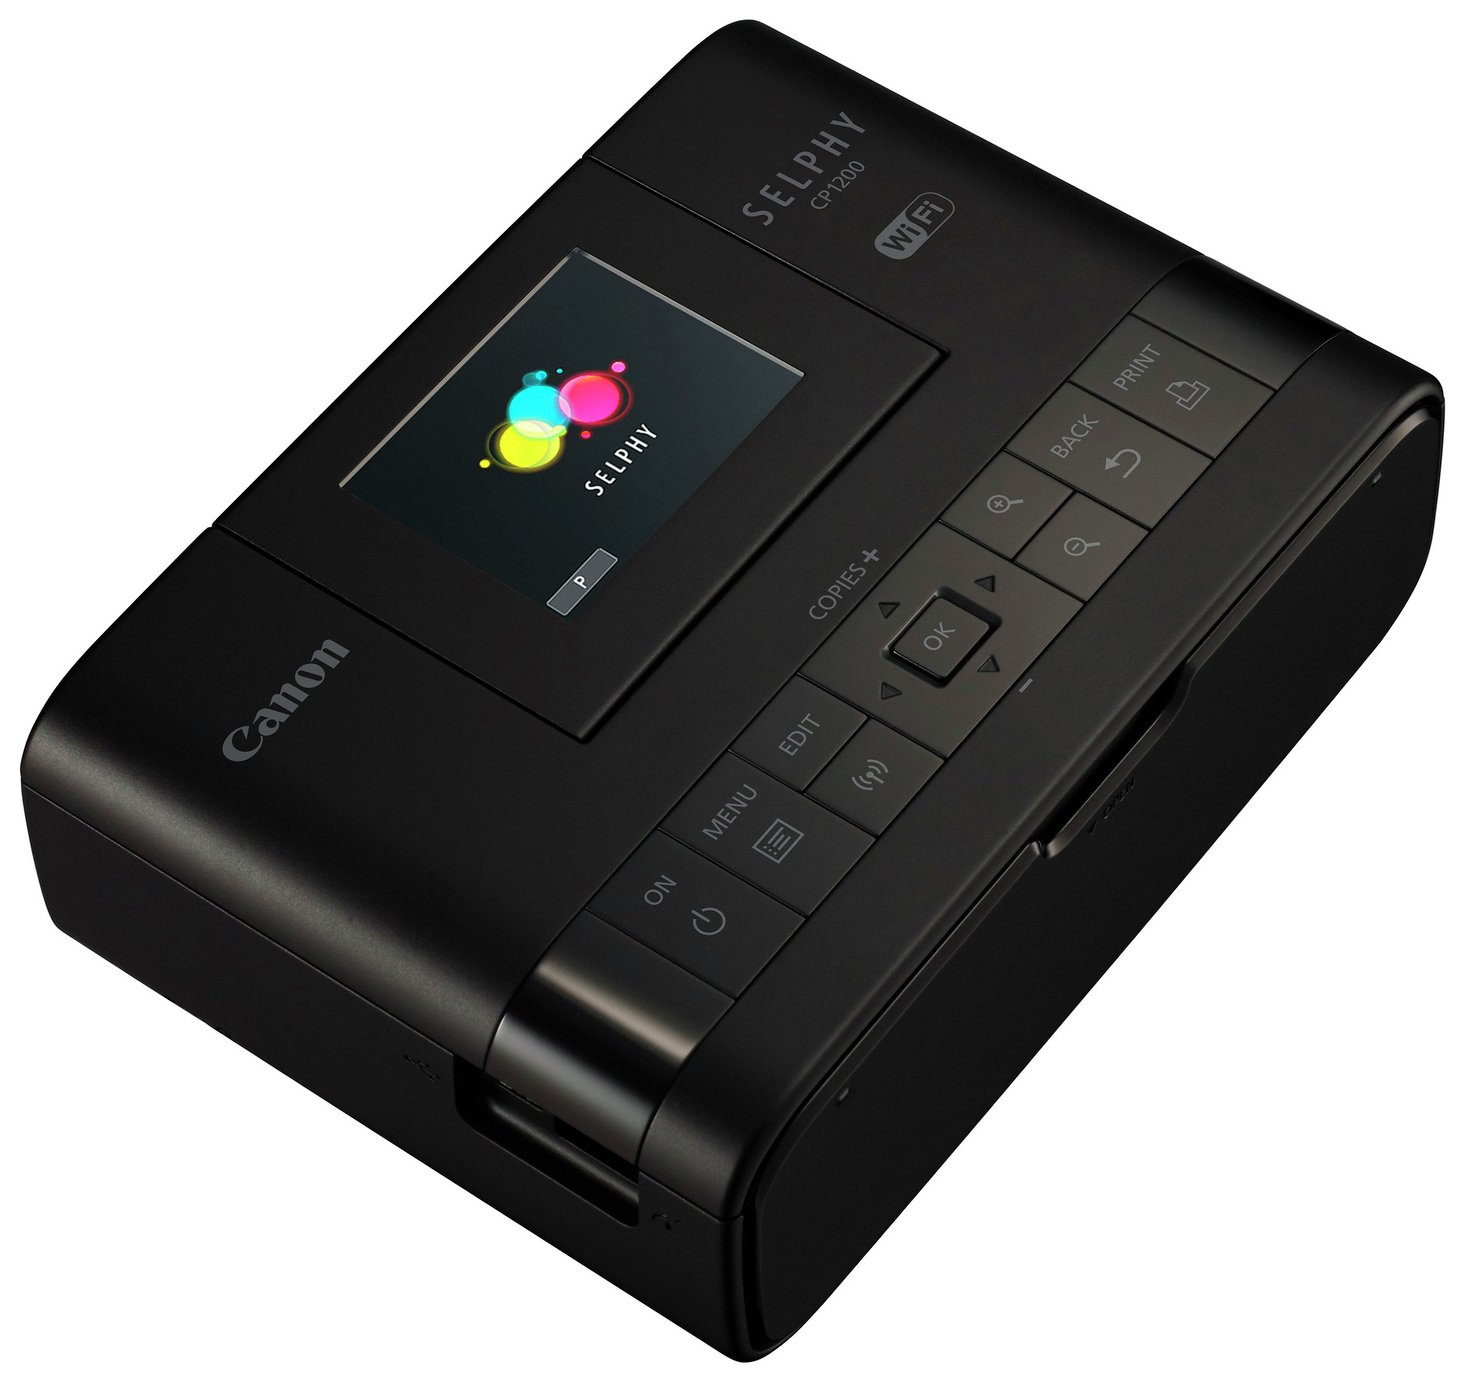 Canon Selphy CP1300 Compact Photo Printer Review